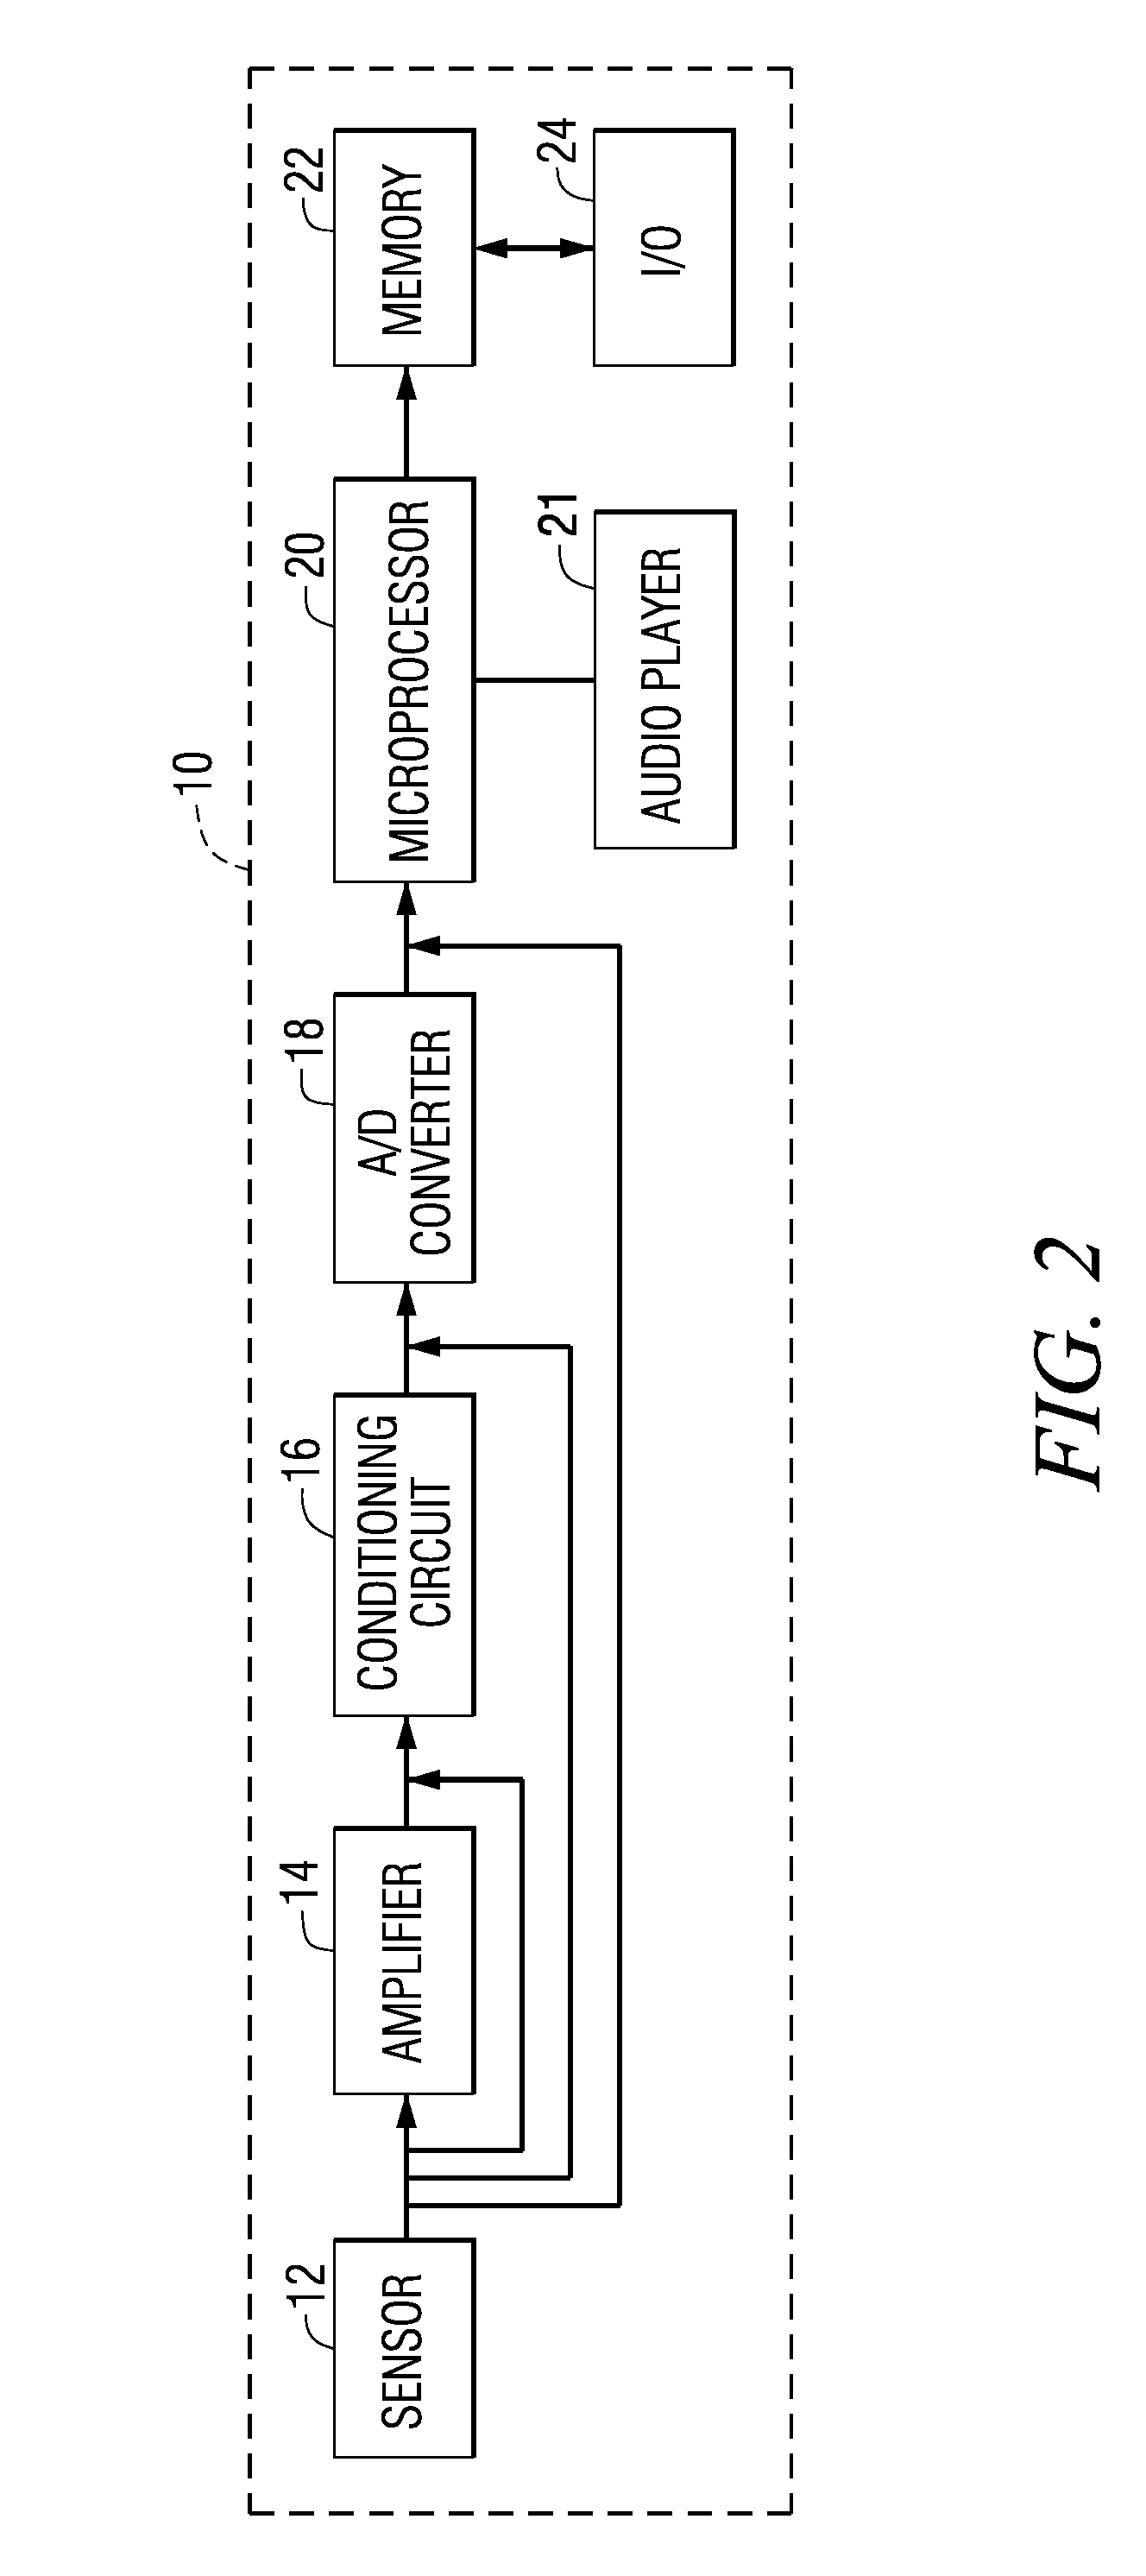 Method and apparatus for determining critical care parameters